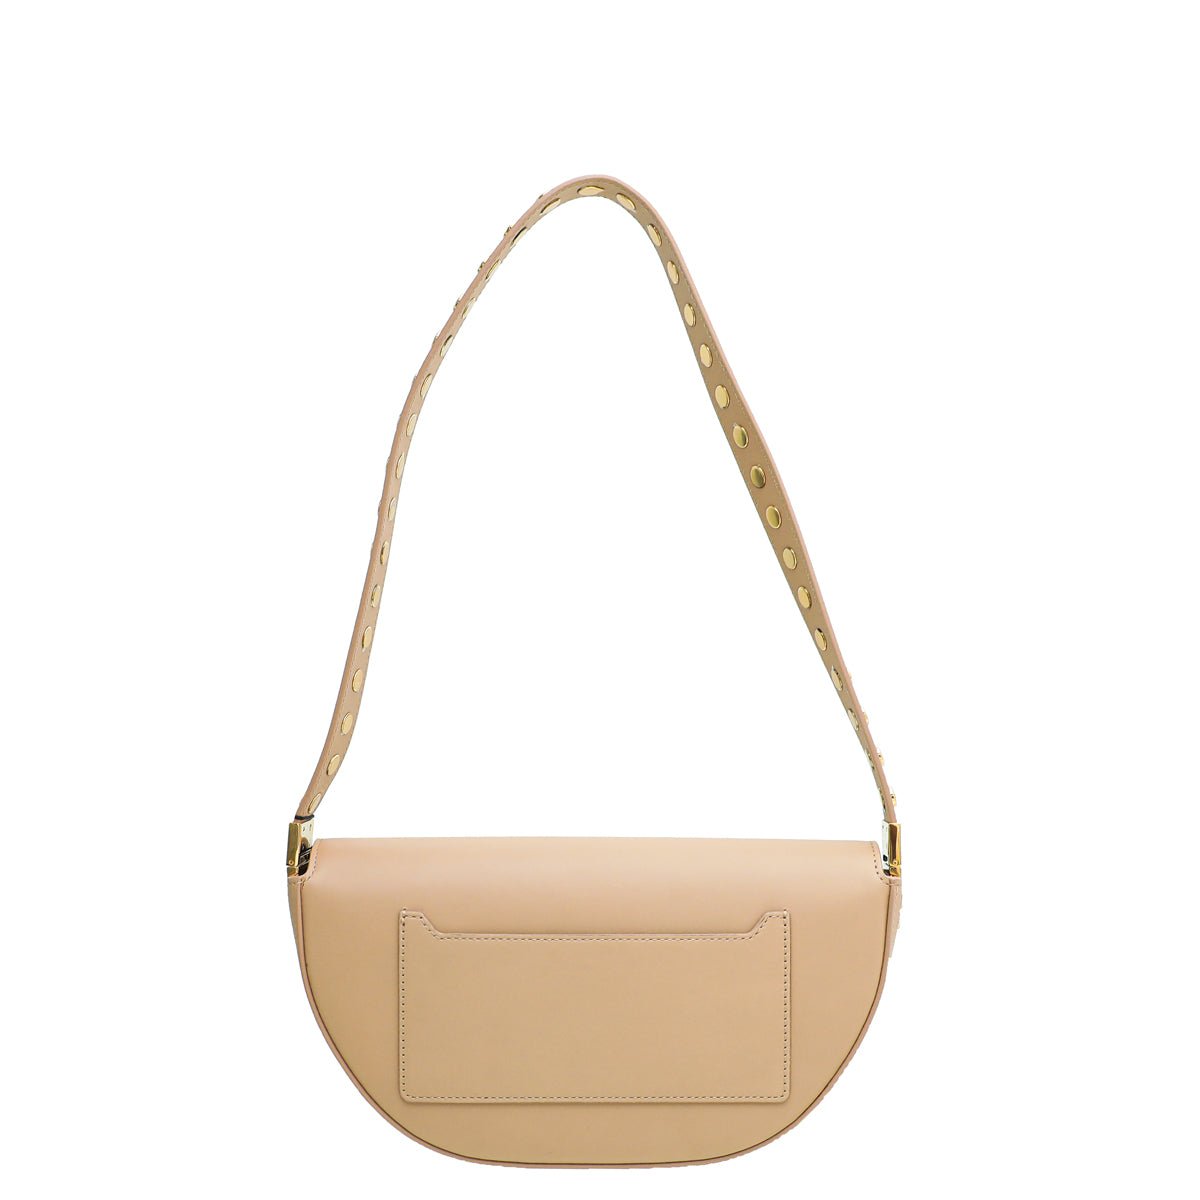 Burberry - Burberry Cool Beige Olympia Studs Small Flap Bag | The Closet